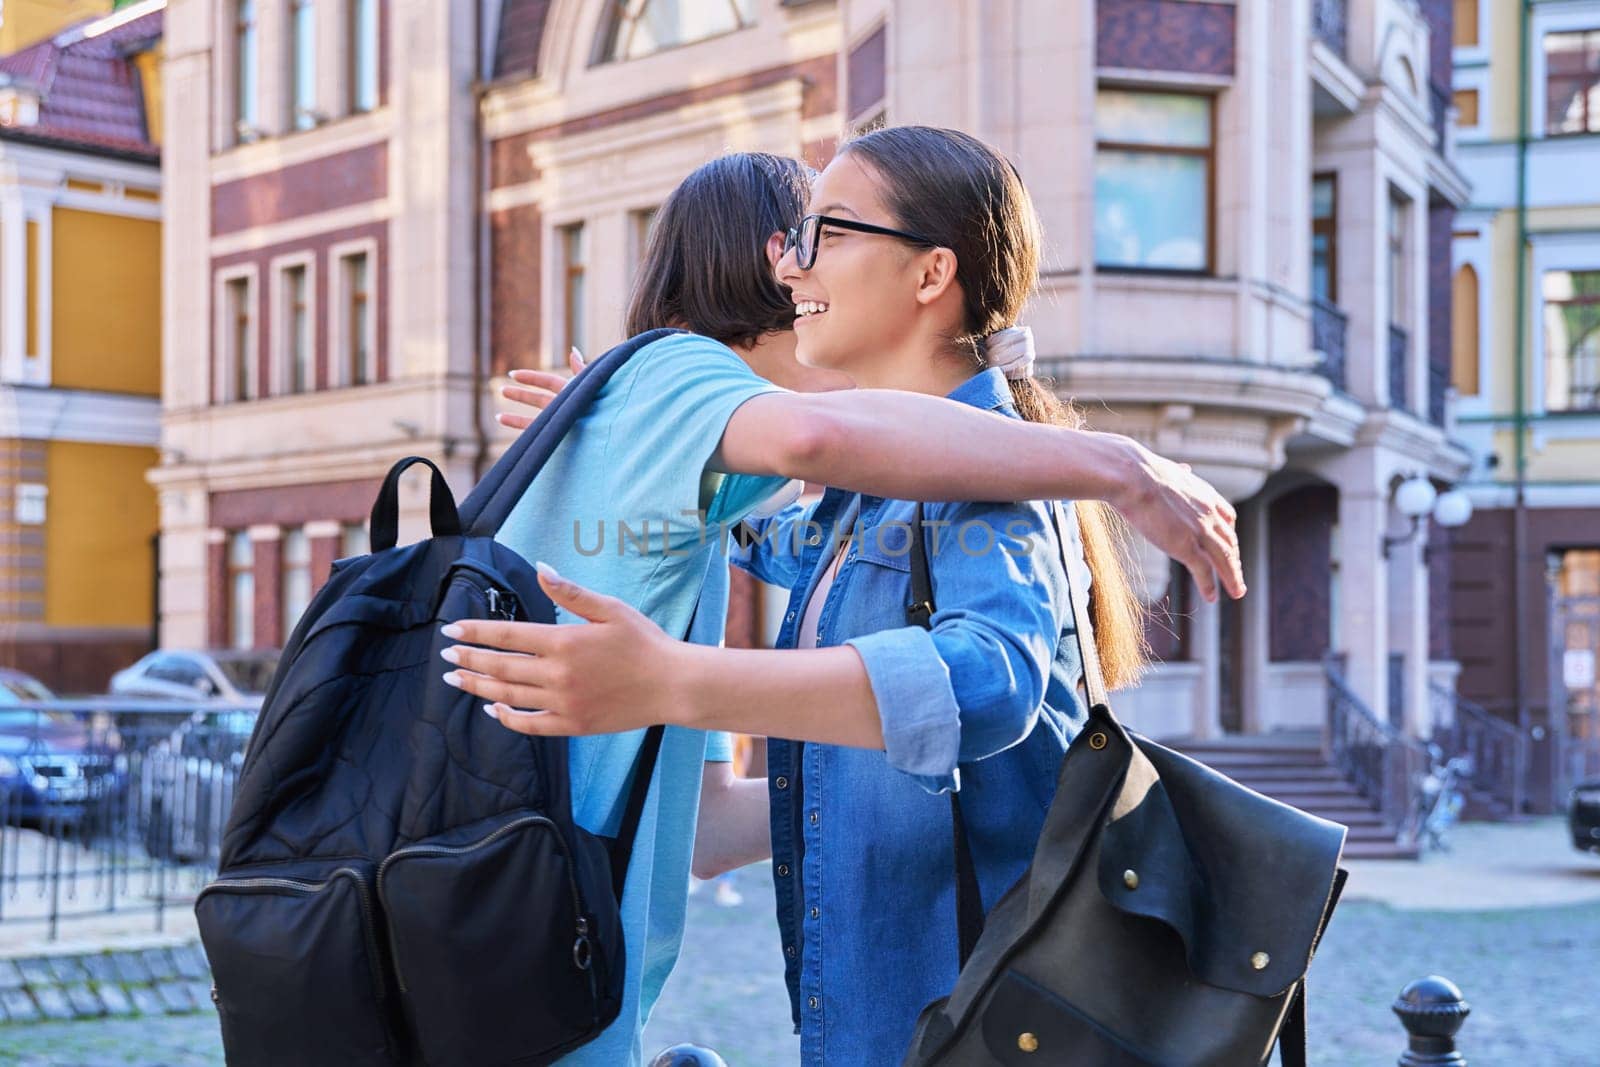 Meeting, hugging teenage male and female friends on the city street. Fashionable having fun teenagers guy and girl together. Friendship, communication, holidays, lifestyle, youth, urban style